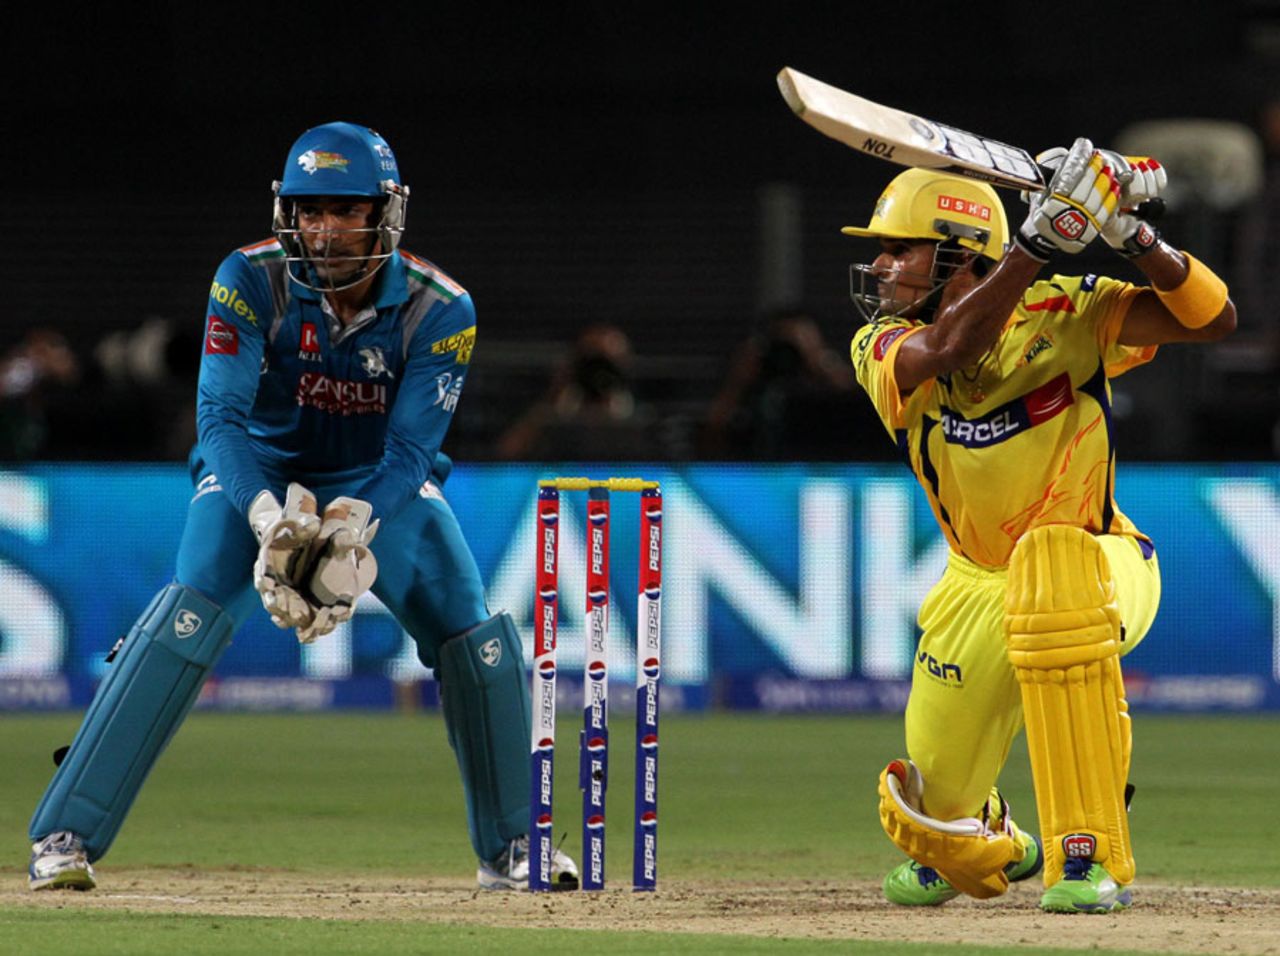 S Badrinath plays through the off side, Pune Warriors v Chennai Super Kings, IPL, Pune, April 30, 2013